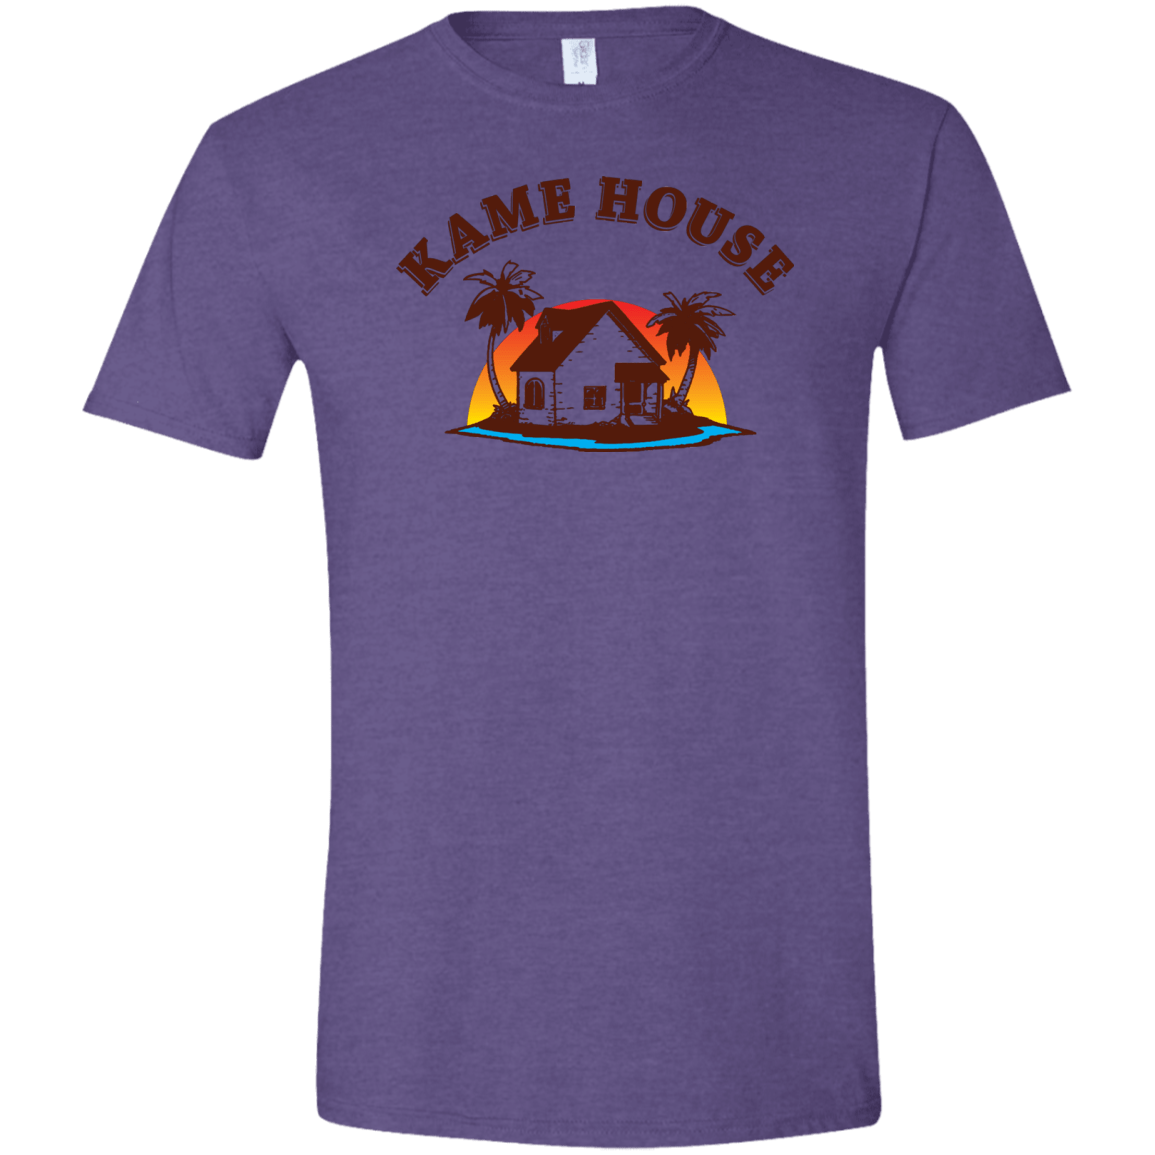 T-Shirts Heather Purple / S Kame House Men's Semi-Fitted Softstyle